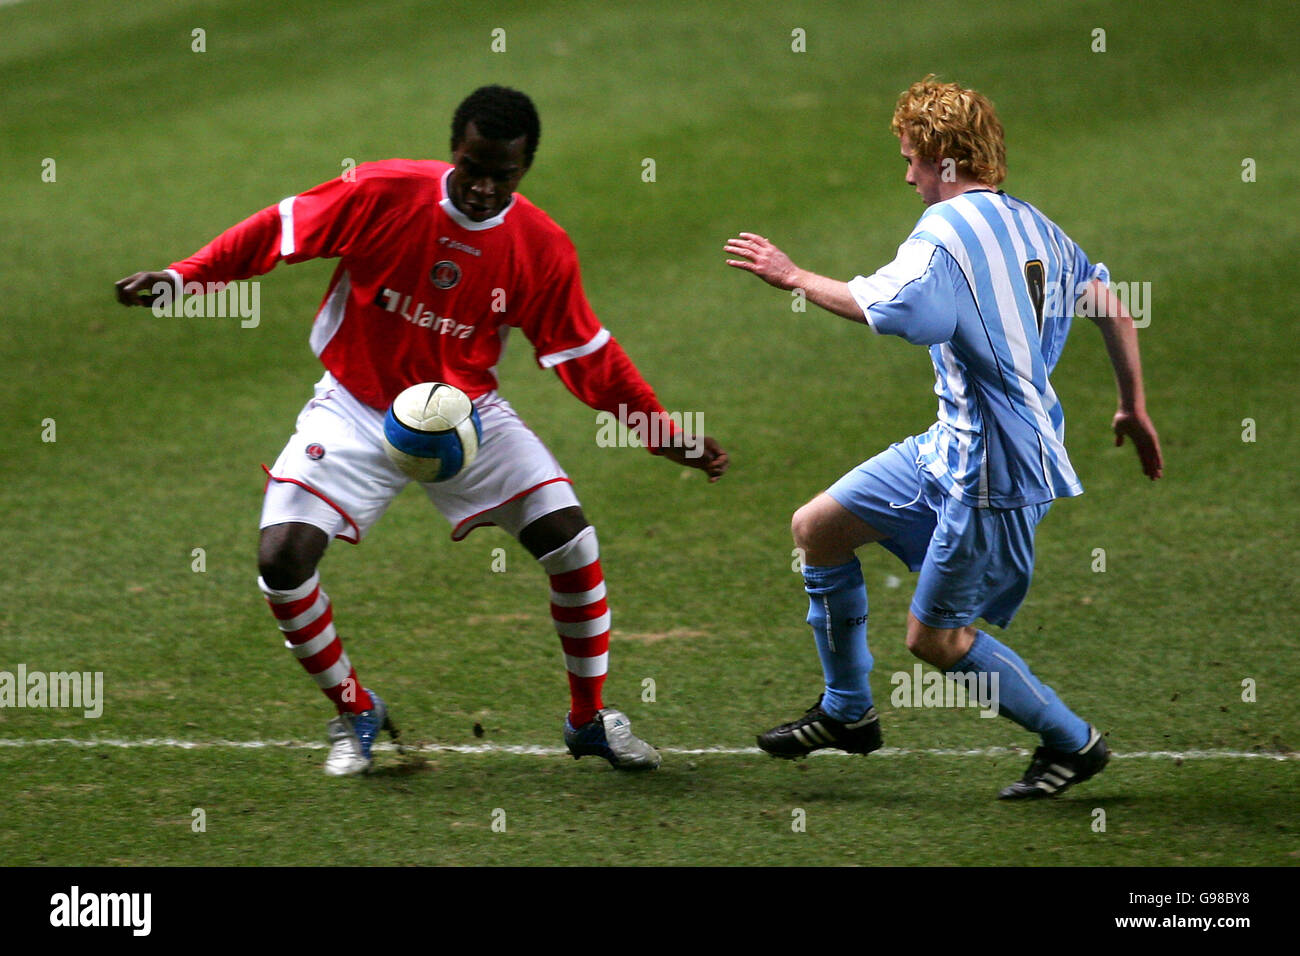 Charlton Athletic's Kelly Youga takes on Coventry City's Kevin Thornton (r) Stock Photo